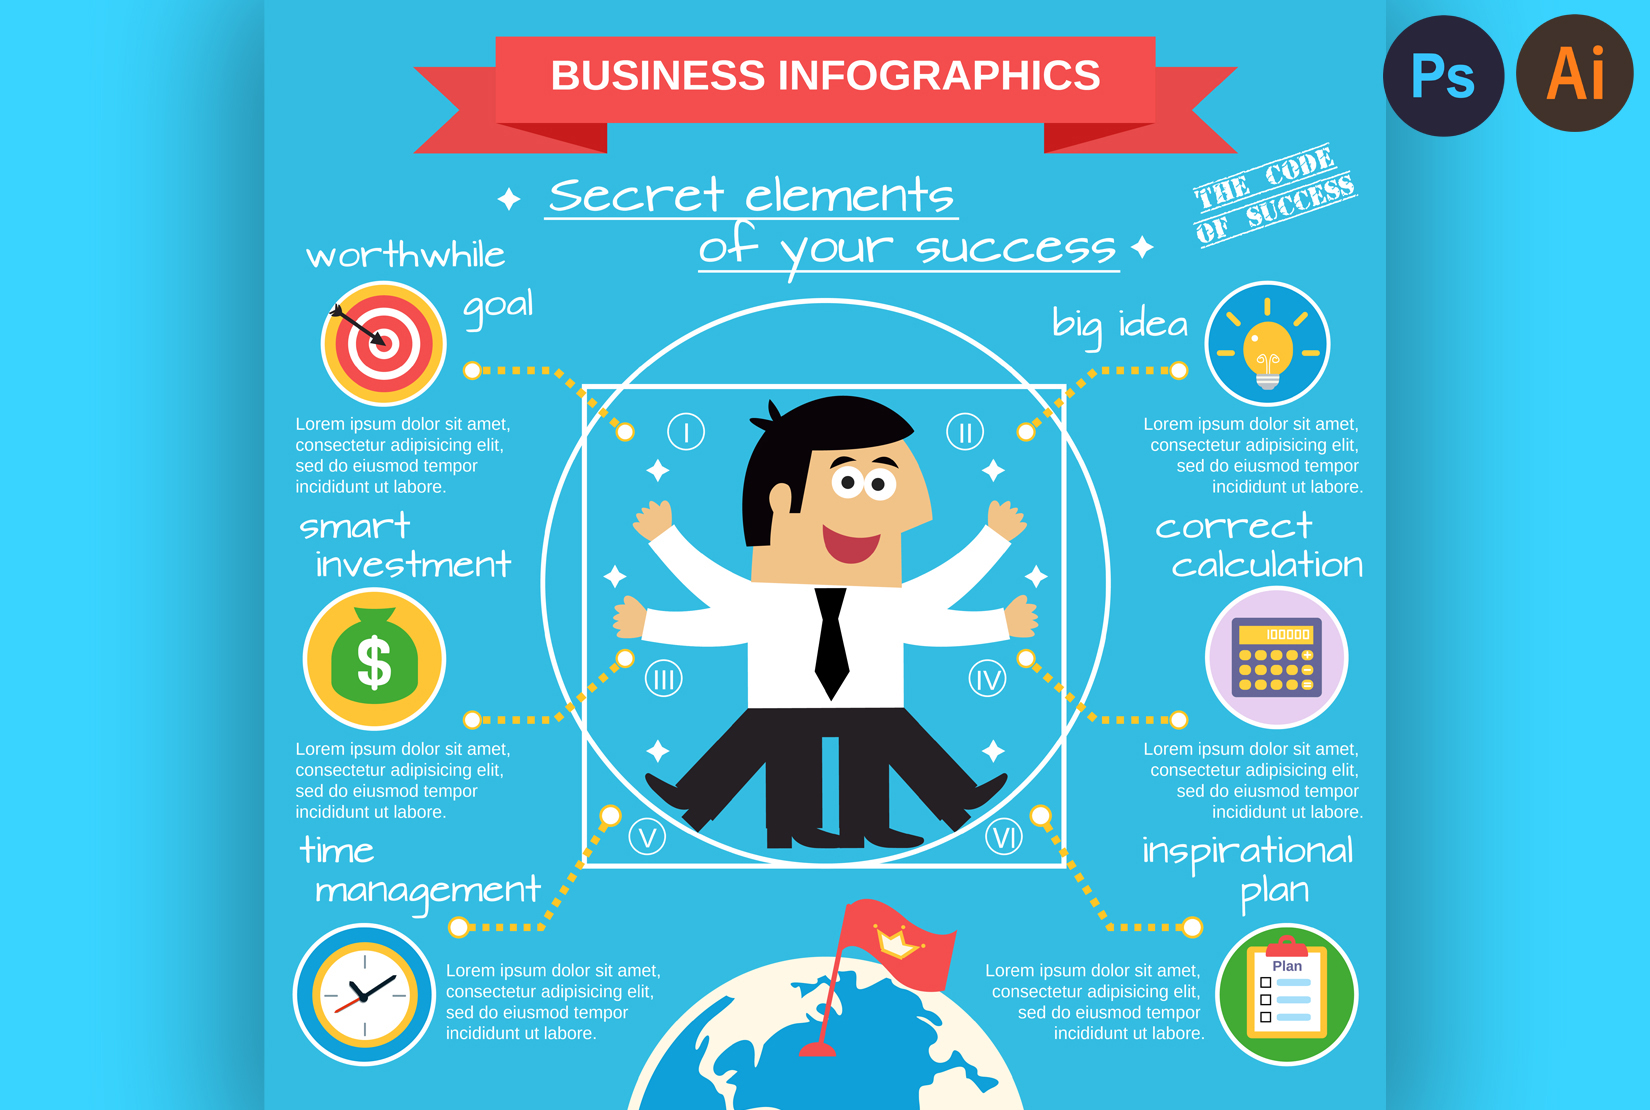 Jcdino789: I will create an awesome infographic design for $5 on fiverr.com | Infographic ...